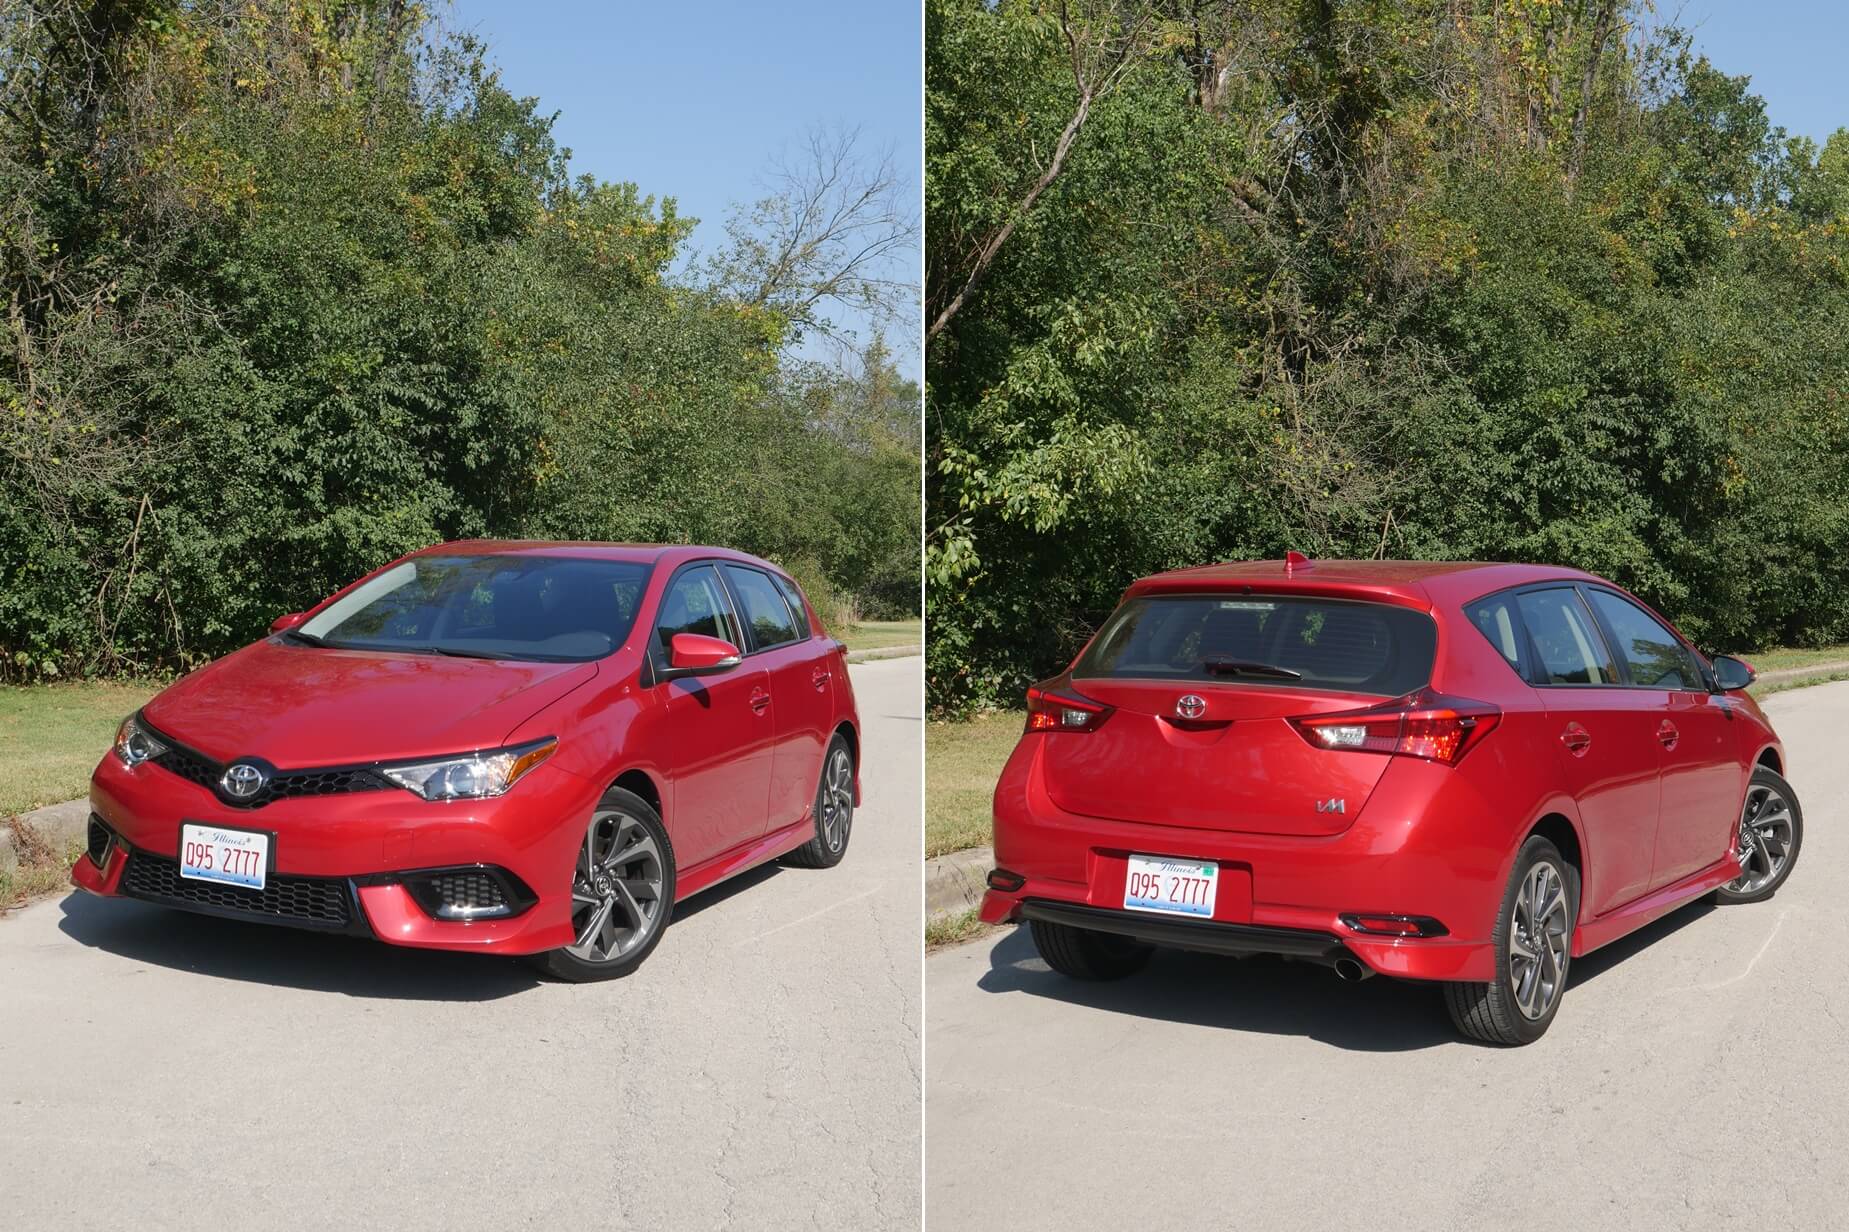 2018 Corolla iM: for buyers seeking some zing in a modestly priced, but generously equipped compact hatchback